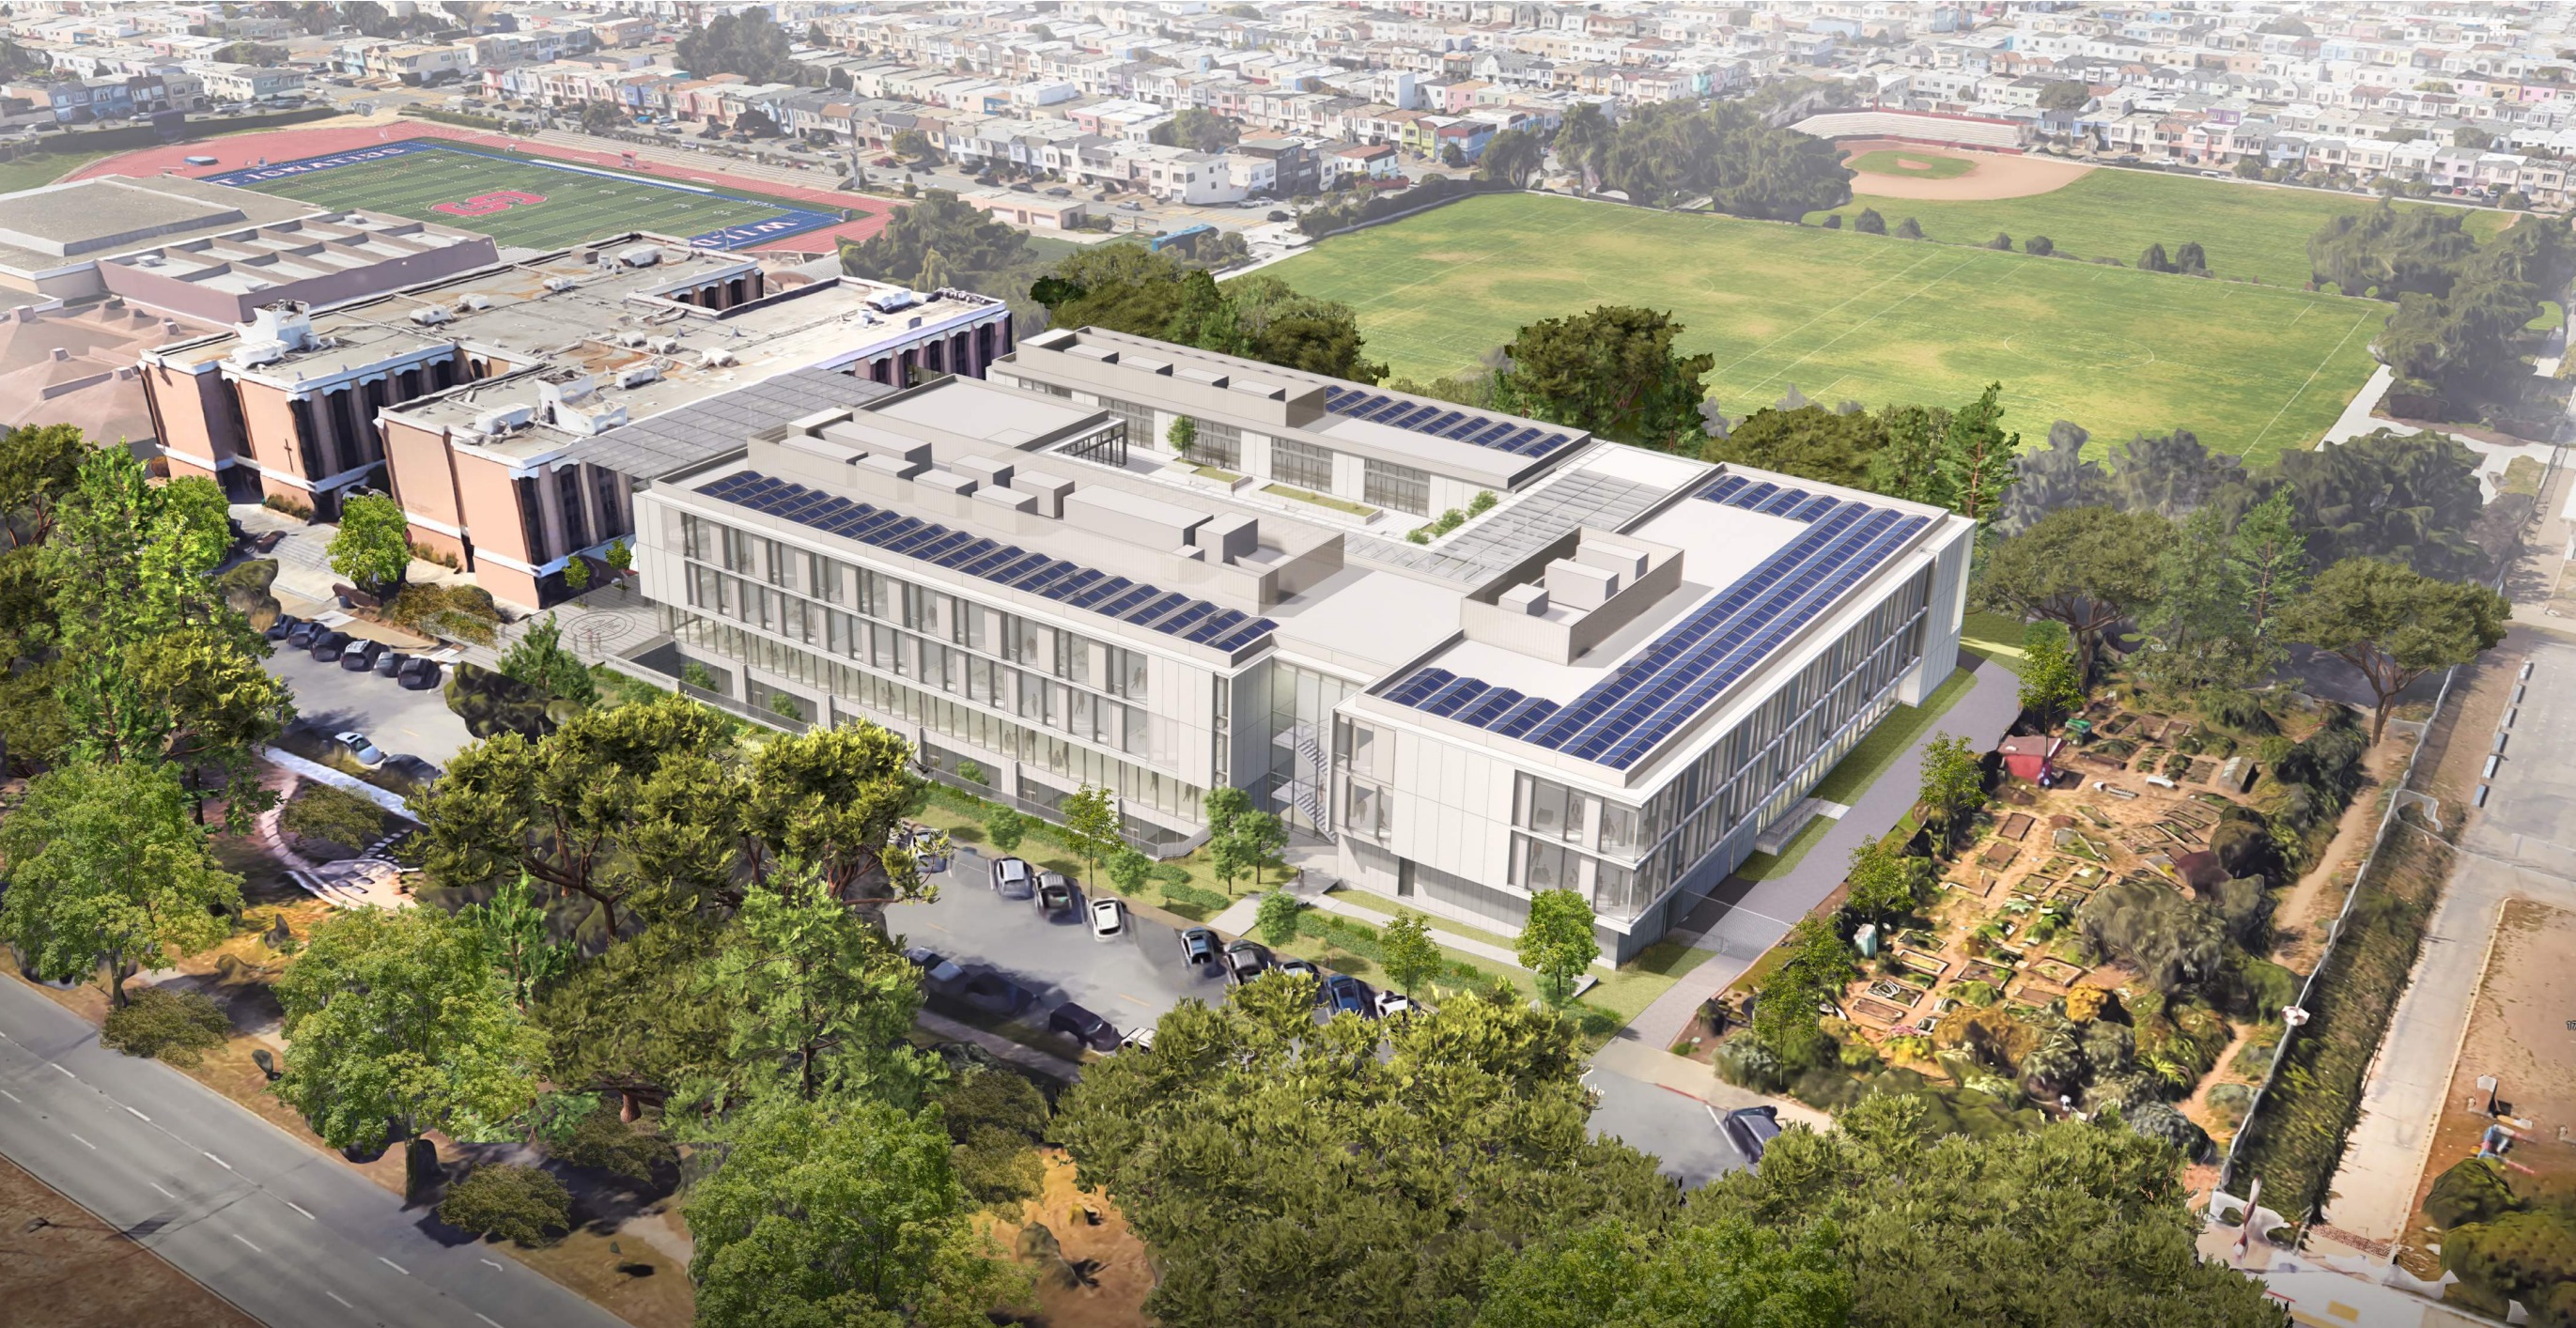 A rendering shared in a San Francisco planning department project application shows what a new addition to the St. Ignatius College Preparatory School will look like when complete.